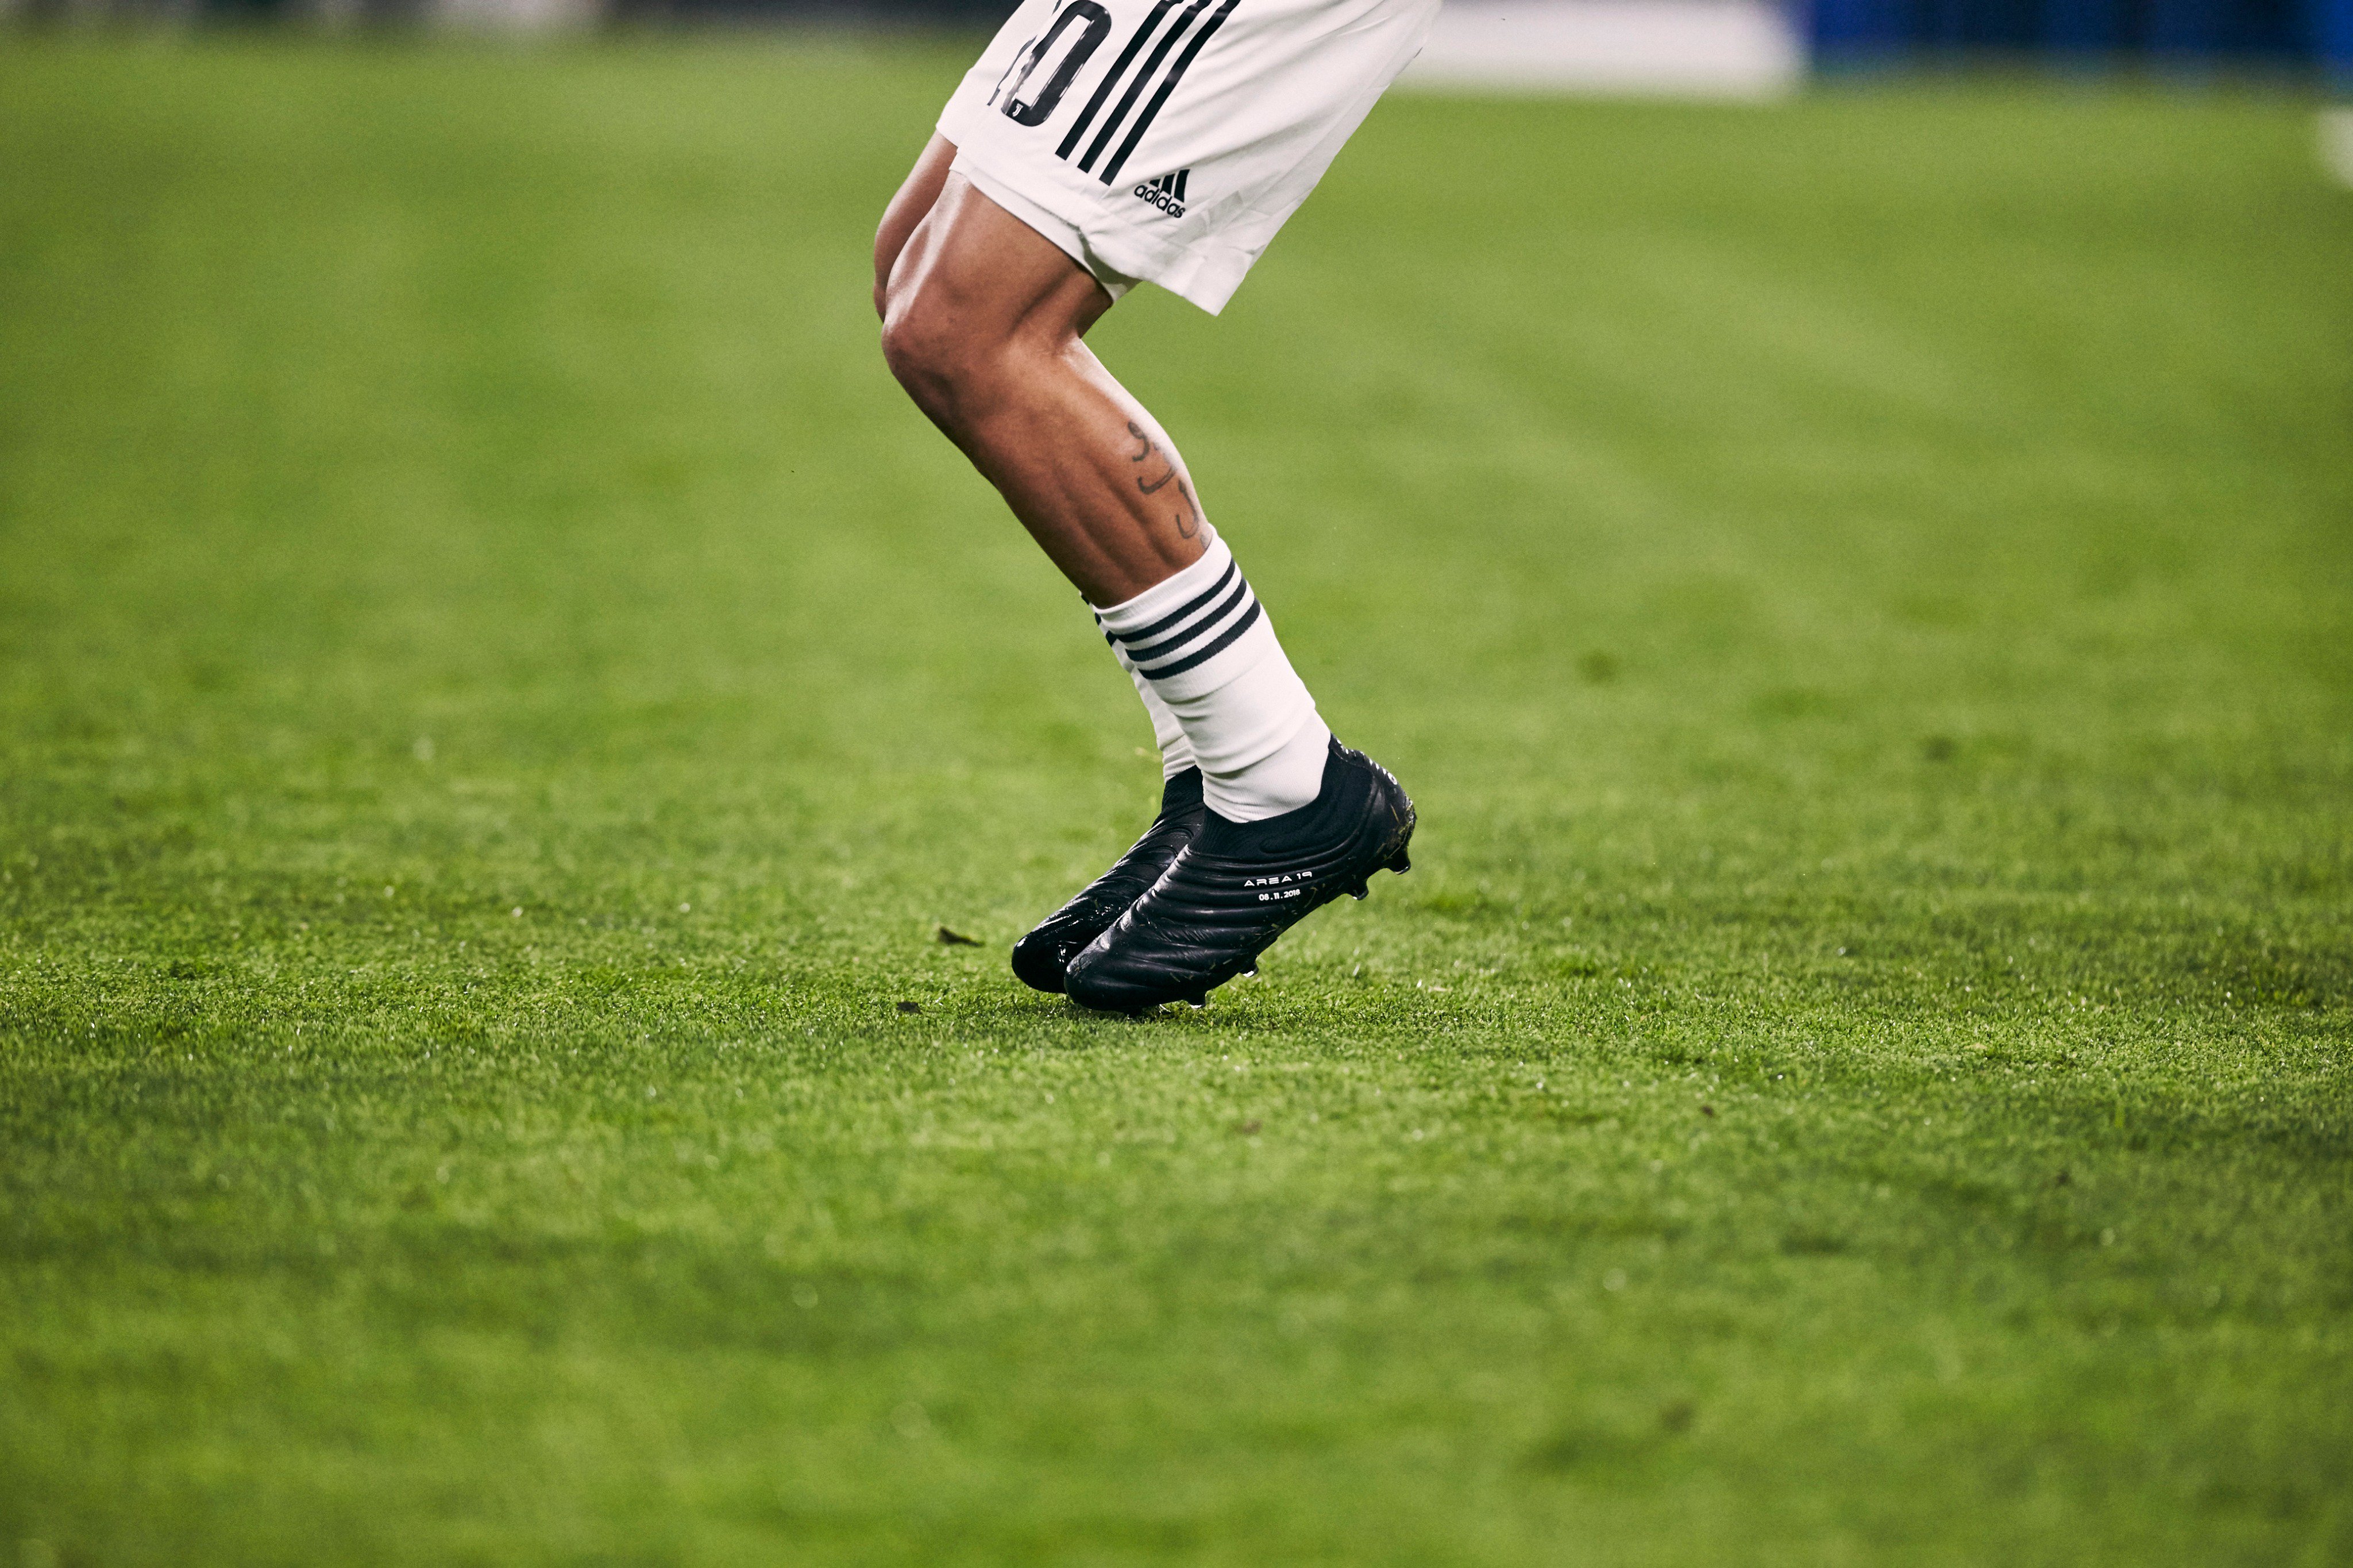 luces Tregua Ortodoxo GOAL no Twitter: "Paulo Dybala wore these special edition blackout Adidas  Copa 19+ boots last night 😍 One emoji: 🤤 https://t.co/EVHV0O1r80" /  Twitter